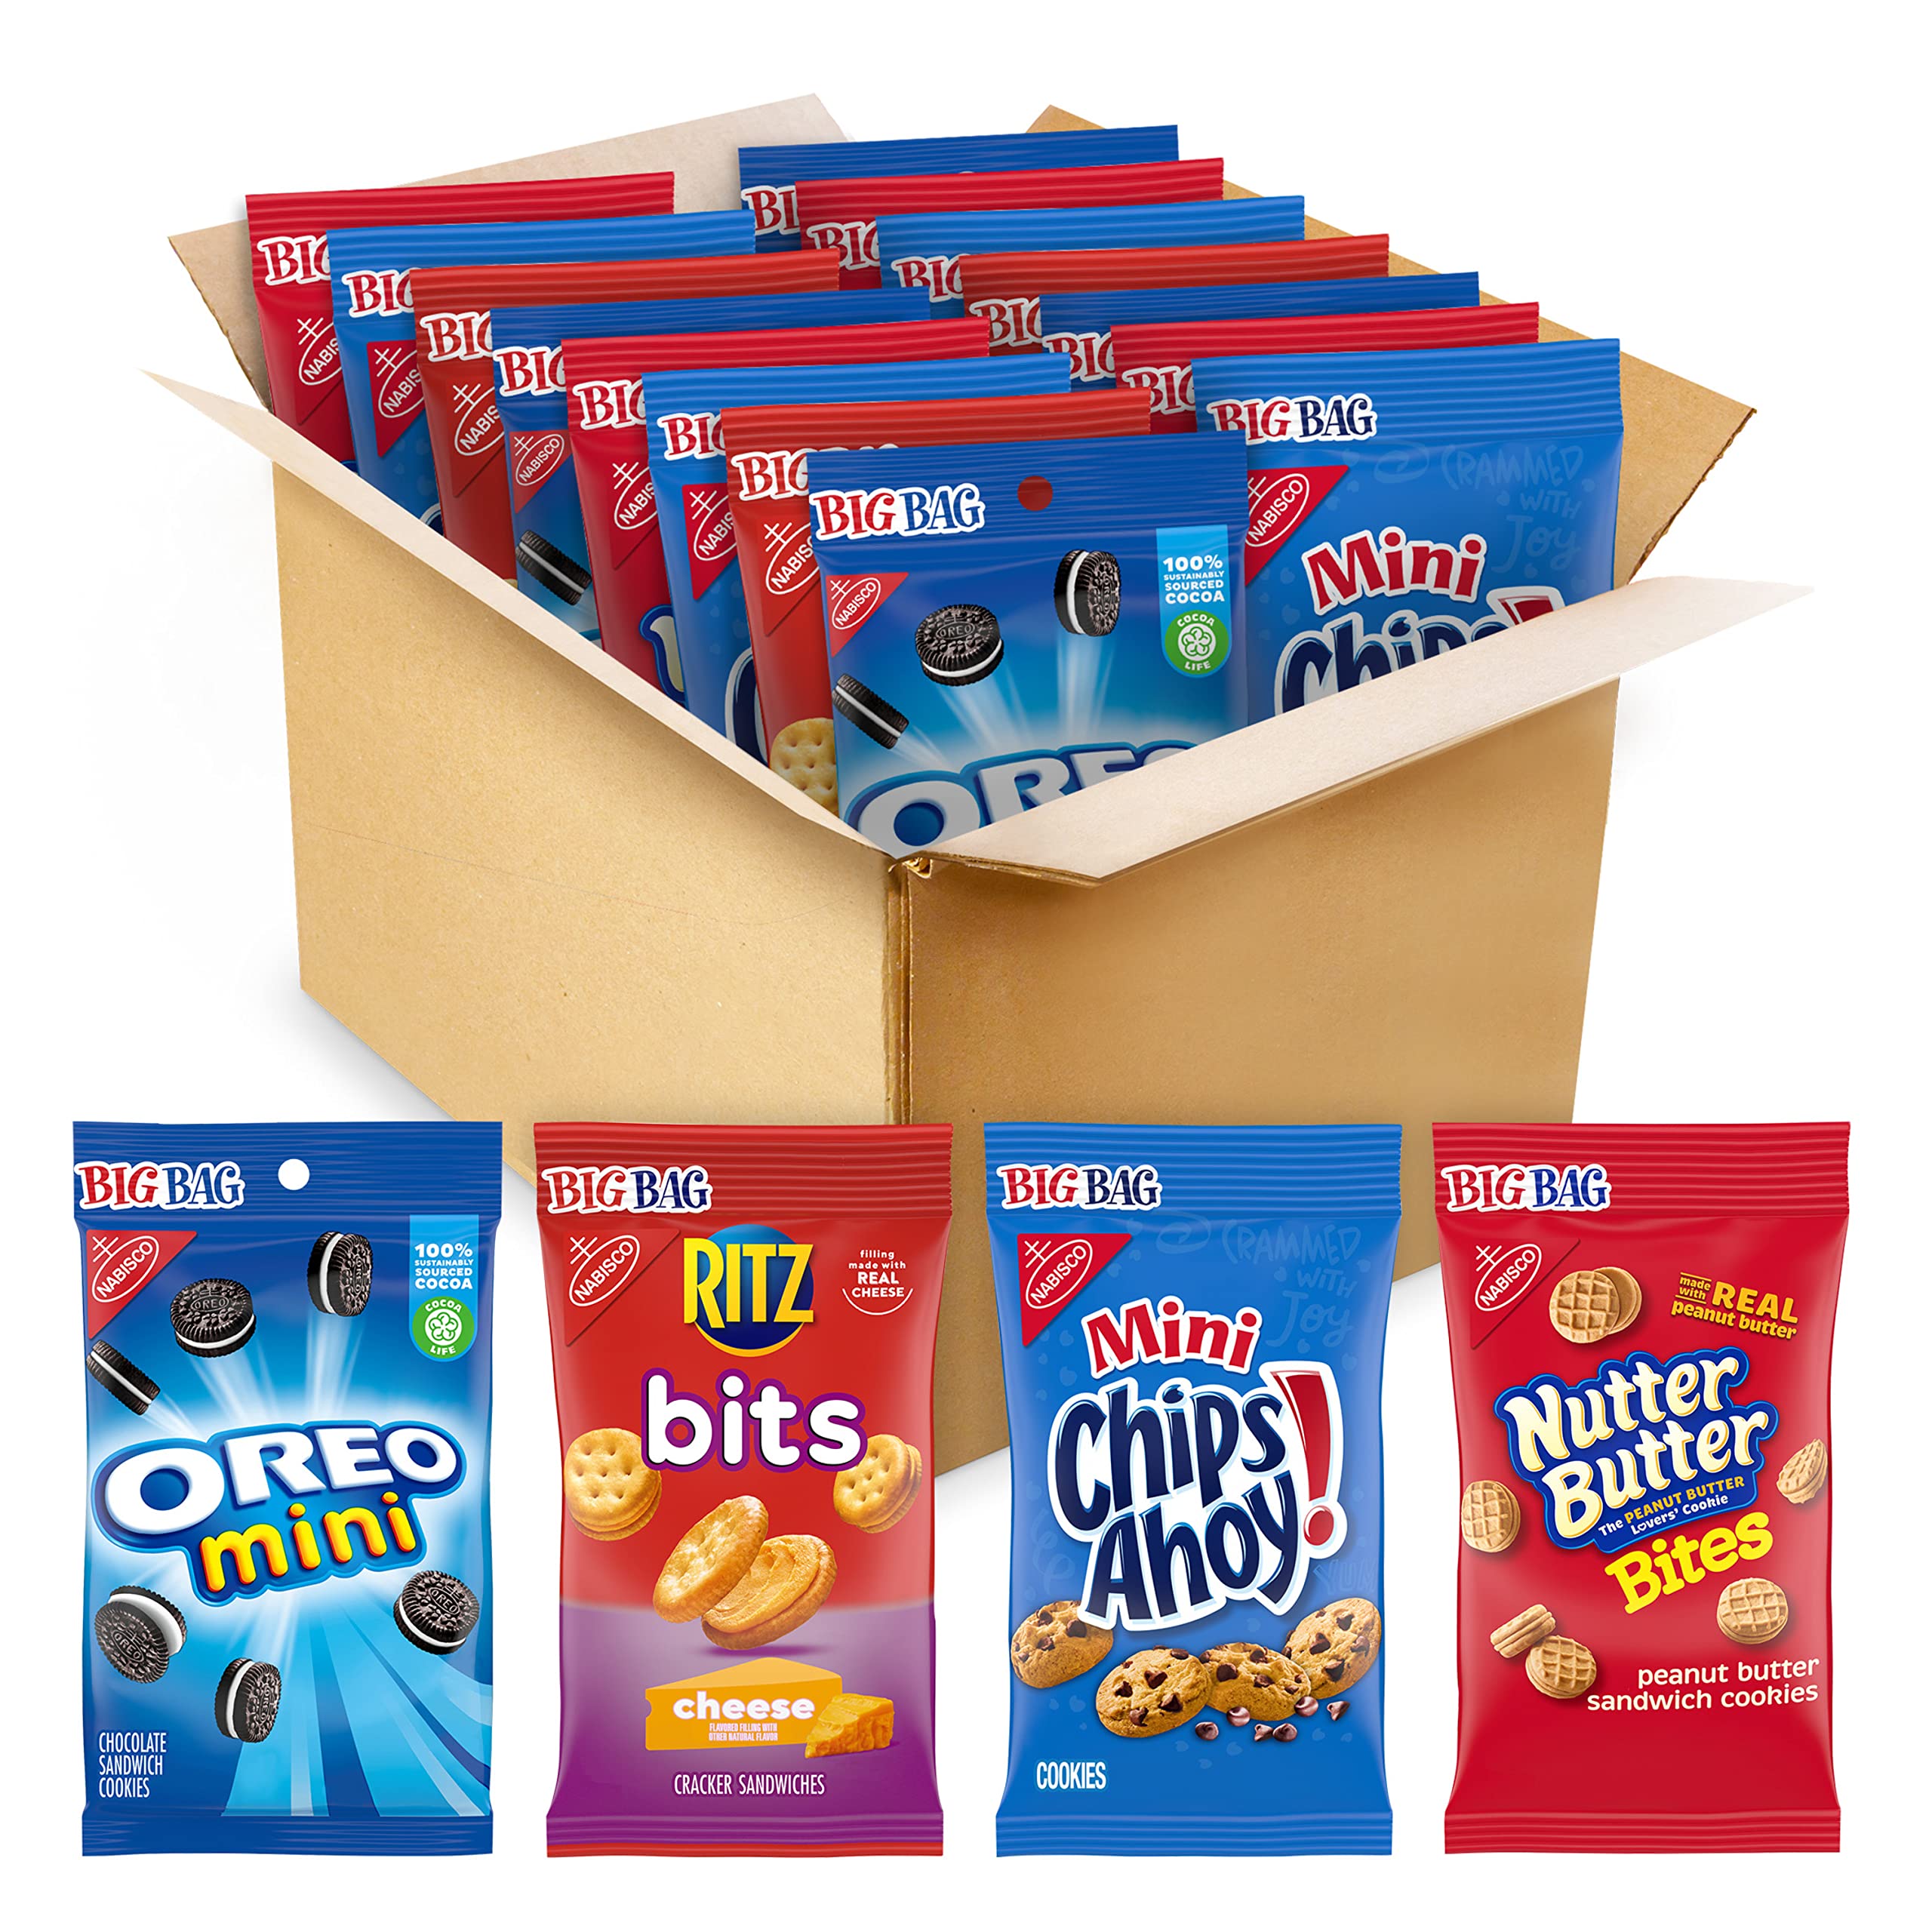 OREO Mini Cookies, CHIPS AHOY! Mini Cookies, Nutter Butter Bites & RITZ Bits Cheese Crackers Variety Pack, 15 Big Bags (assortment may vary)